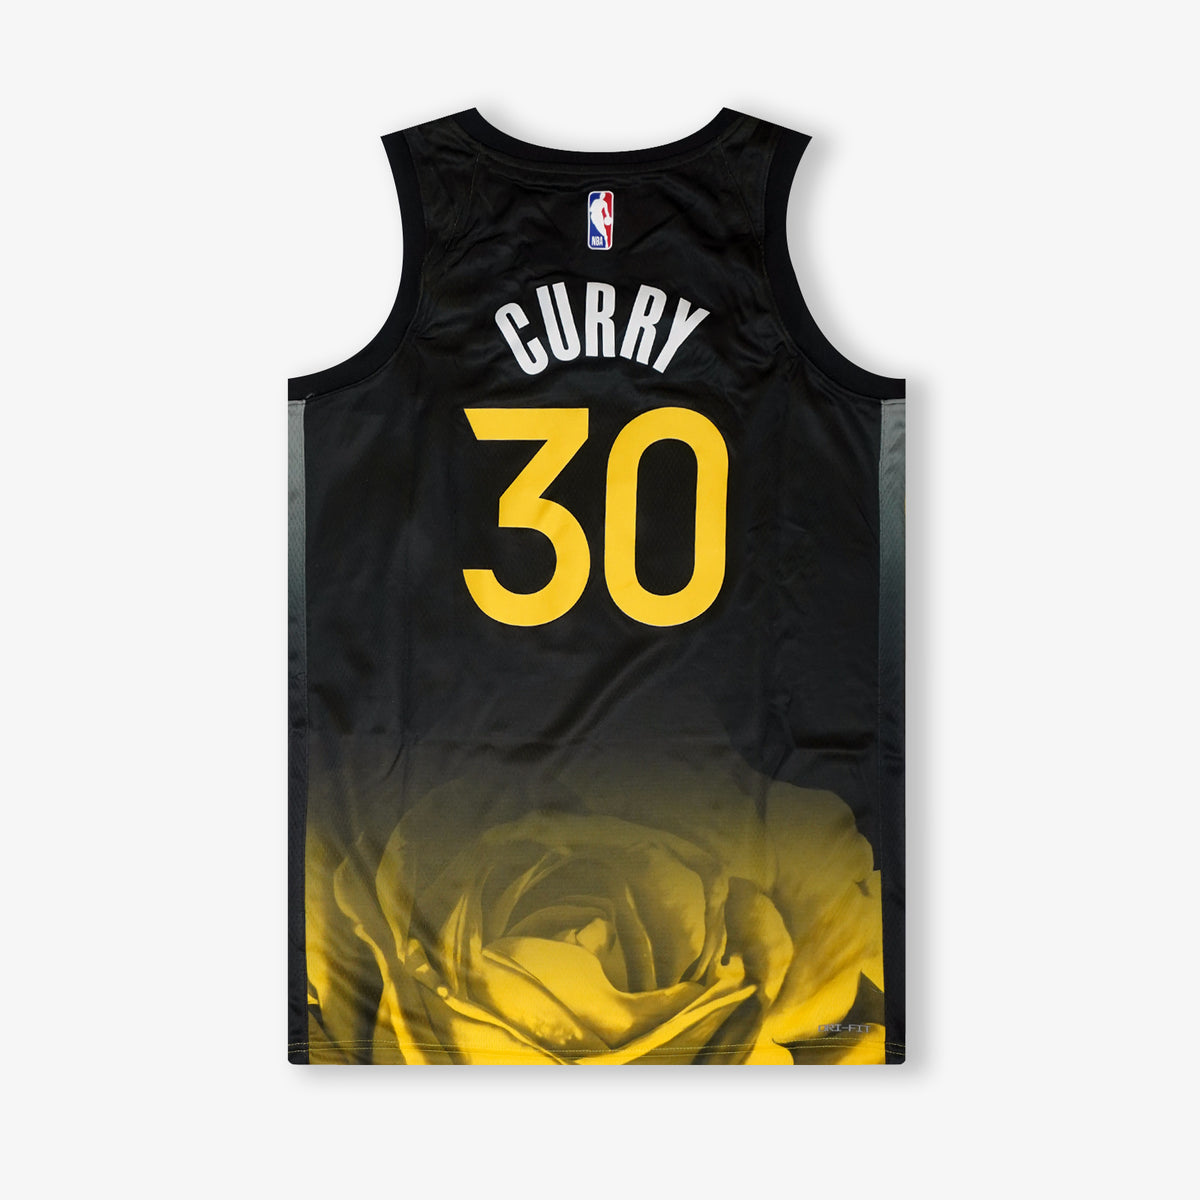 Steph Curry Reacts to Warriors City Edition Jerseys - Inside the Warriors